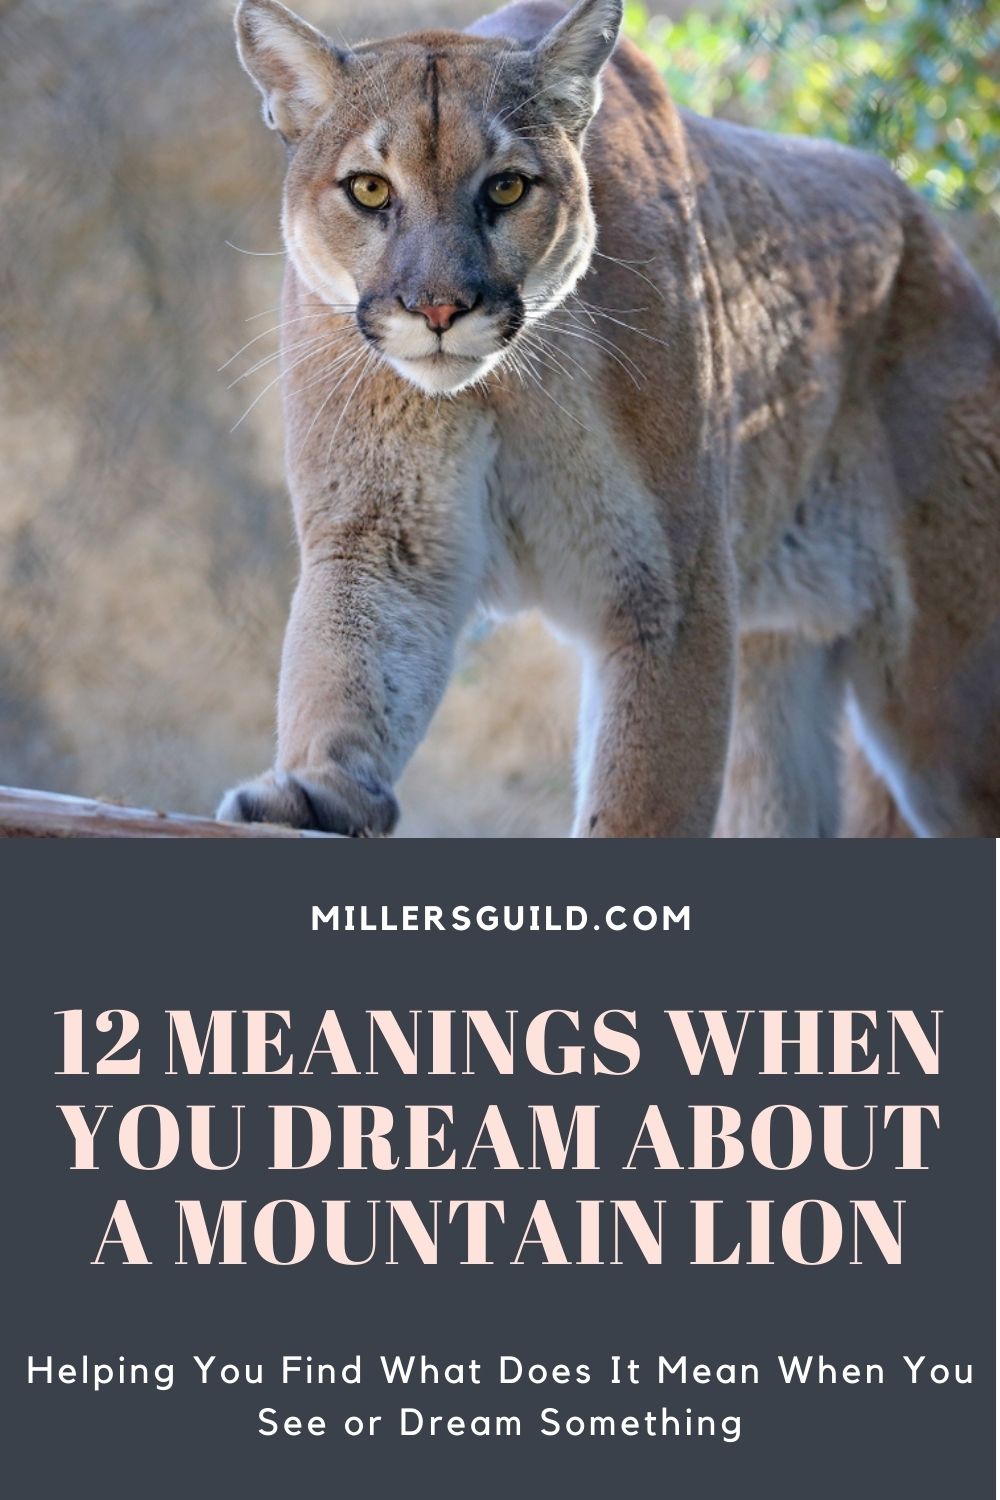 12 Meanings When You Dream About a Mountain Lion 2